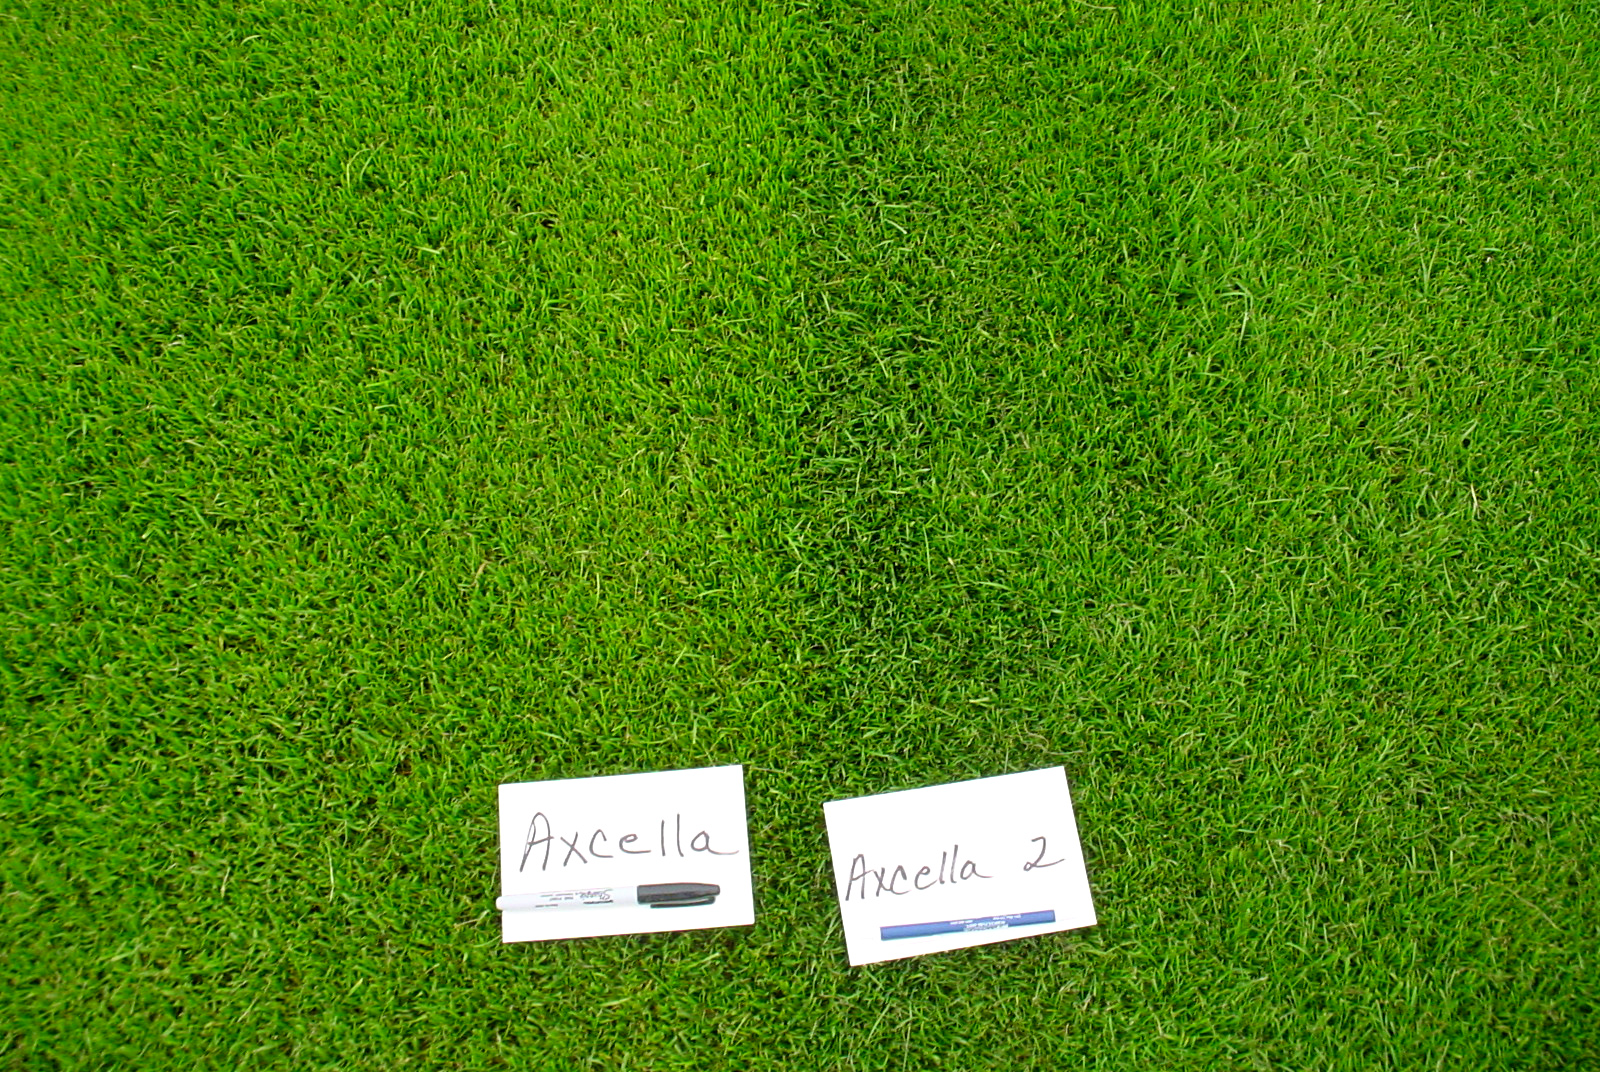 New 'Dwarf' Winter Turf Grass Released | AgriLife Today